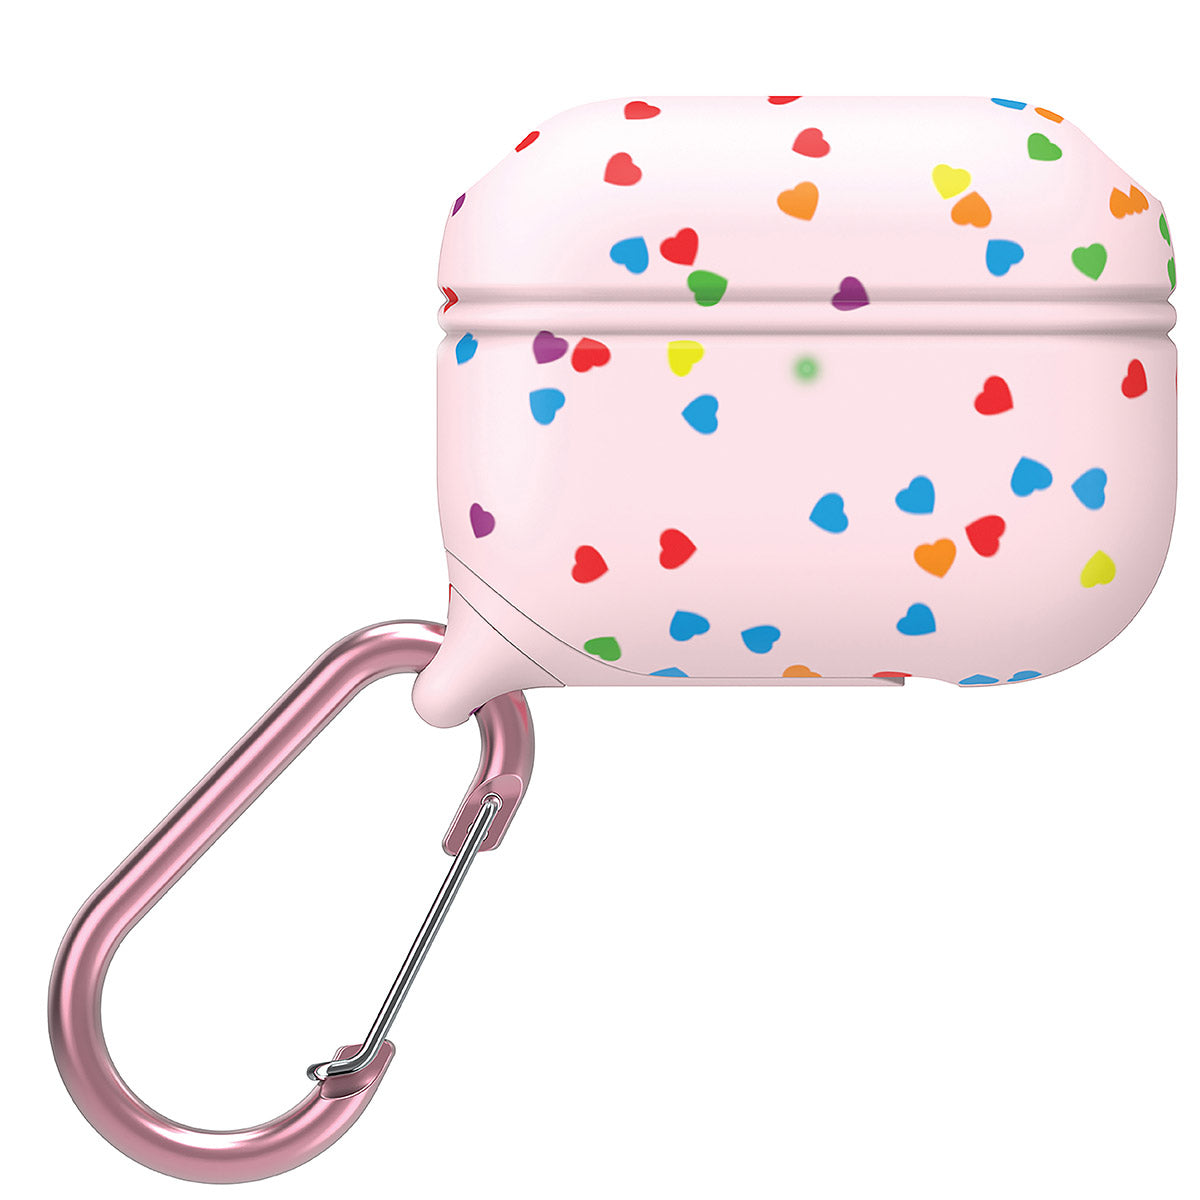 CATAPLAPDPROSWT | catalyst airpods pro gen 2 1 waterproof case carabiner special edition pink with hearts front view